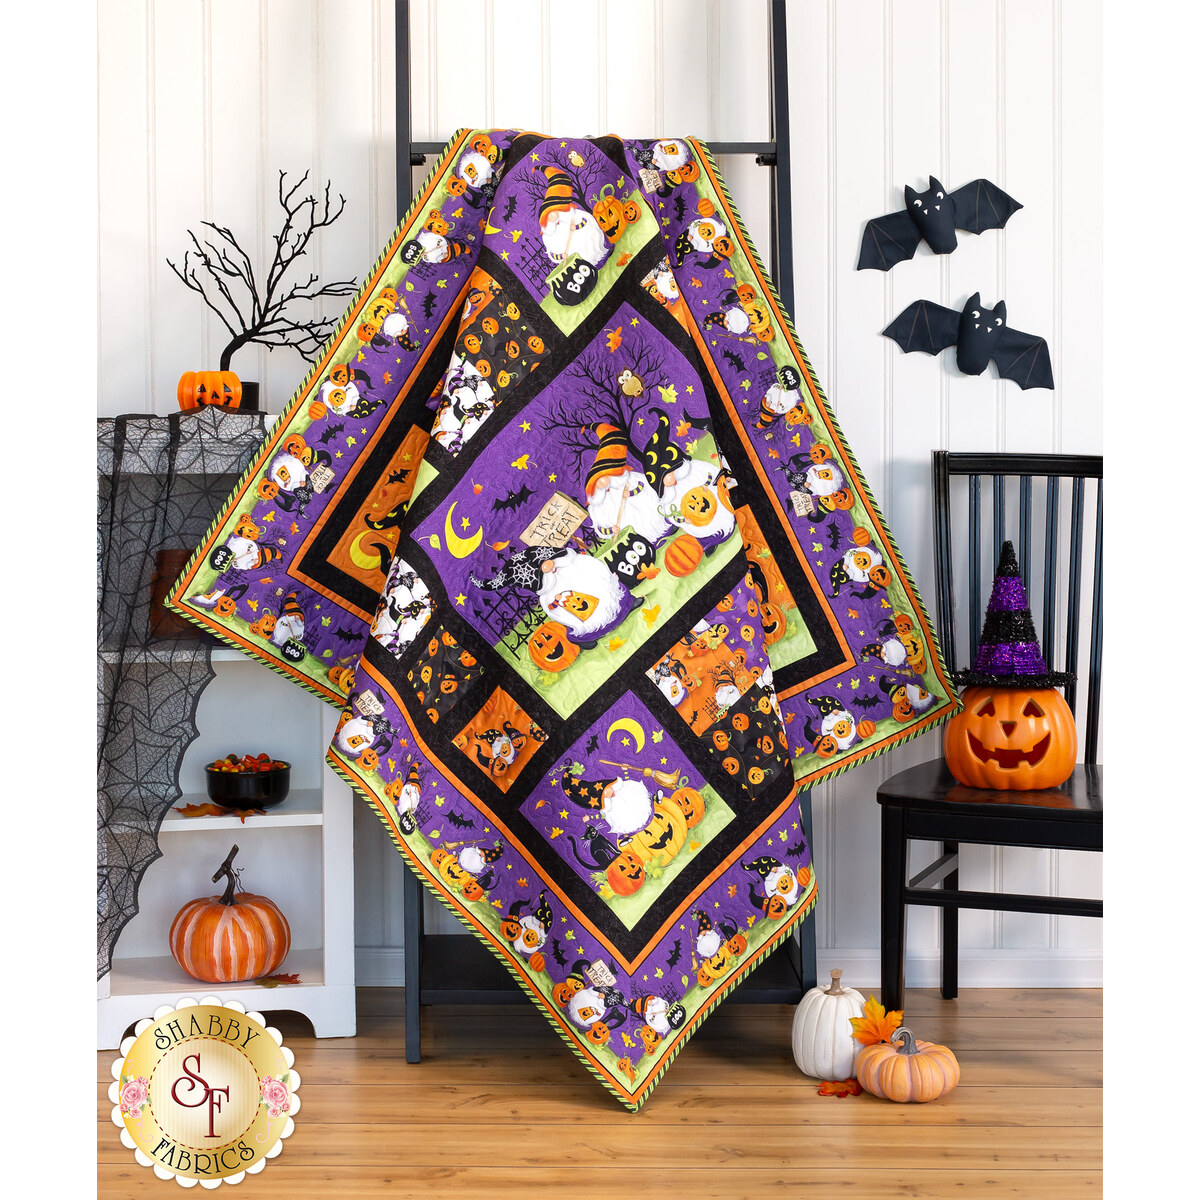 Trick or Treat Panel Quilt Kit